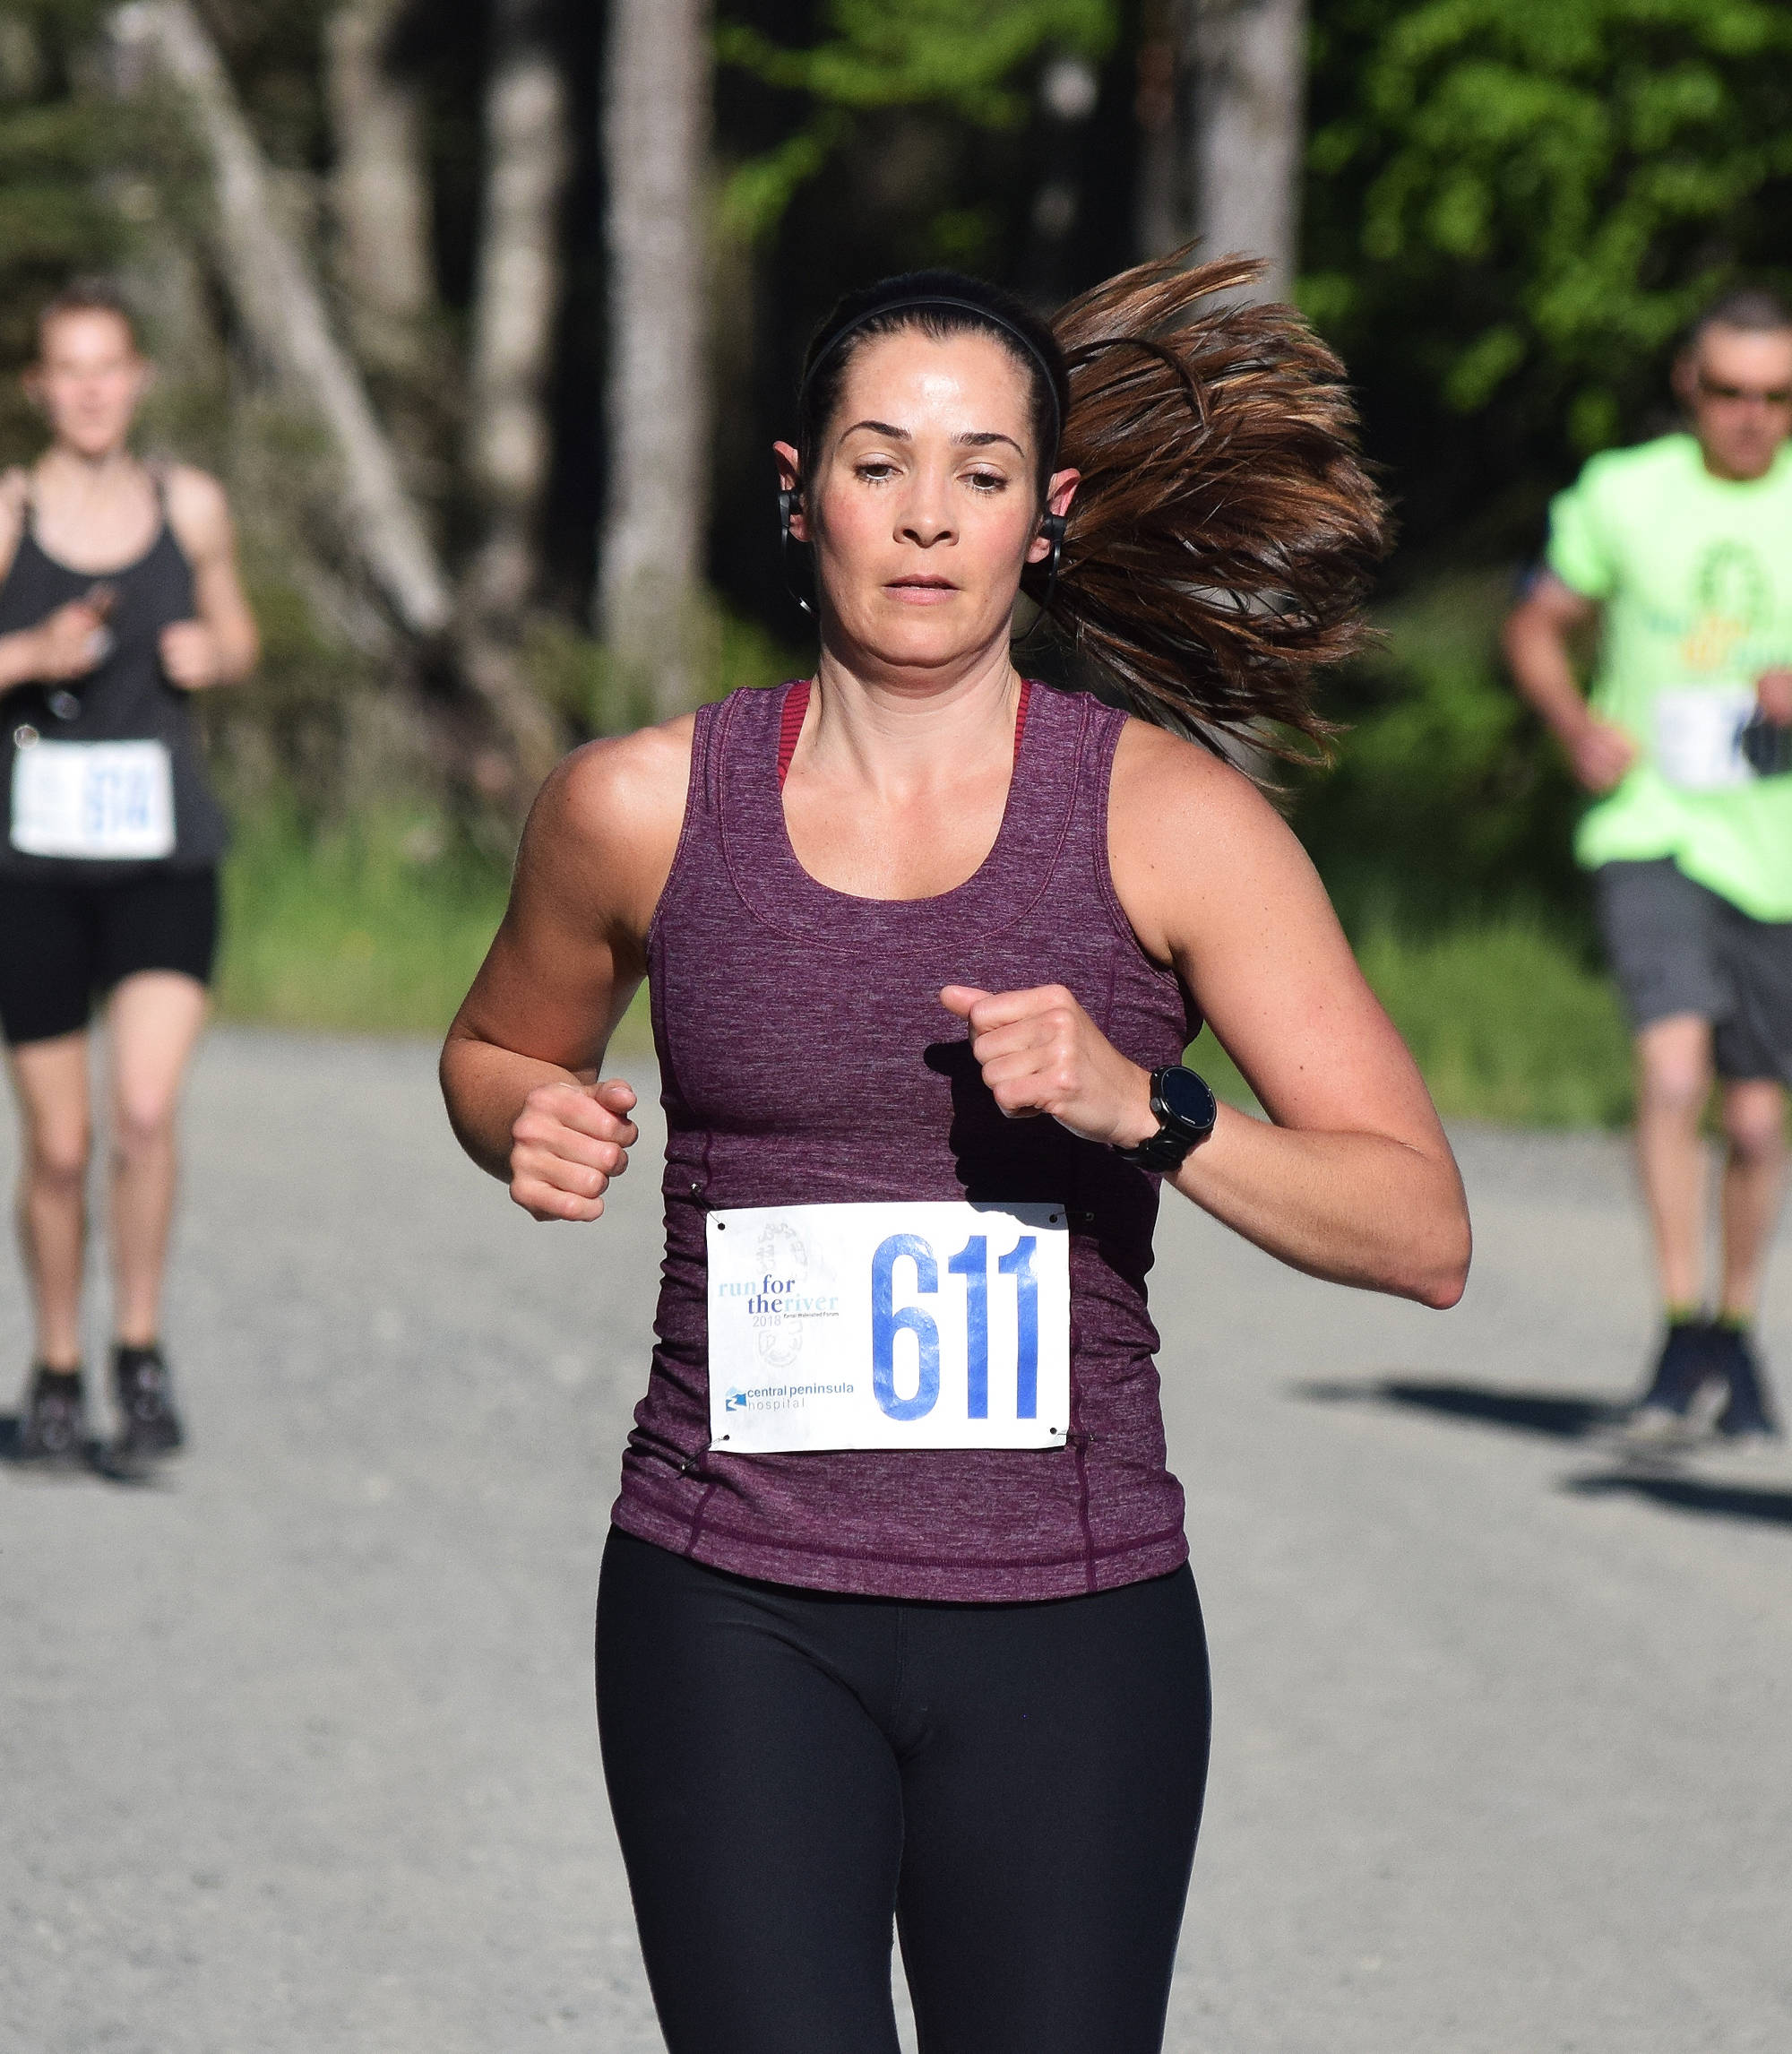 Jodi Hanson sets a pace in the women’s 10-miler Saturday morning at the Run for the River 5K/10-mile races near Soldotna Creek Park. (Photo by Joey Klecka/Peninsula Clarion)